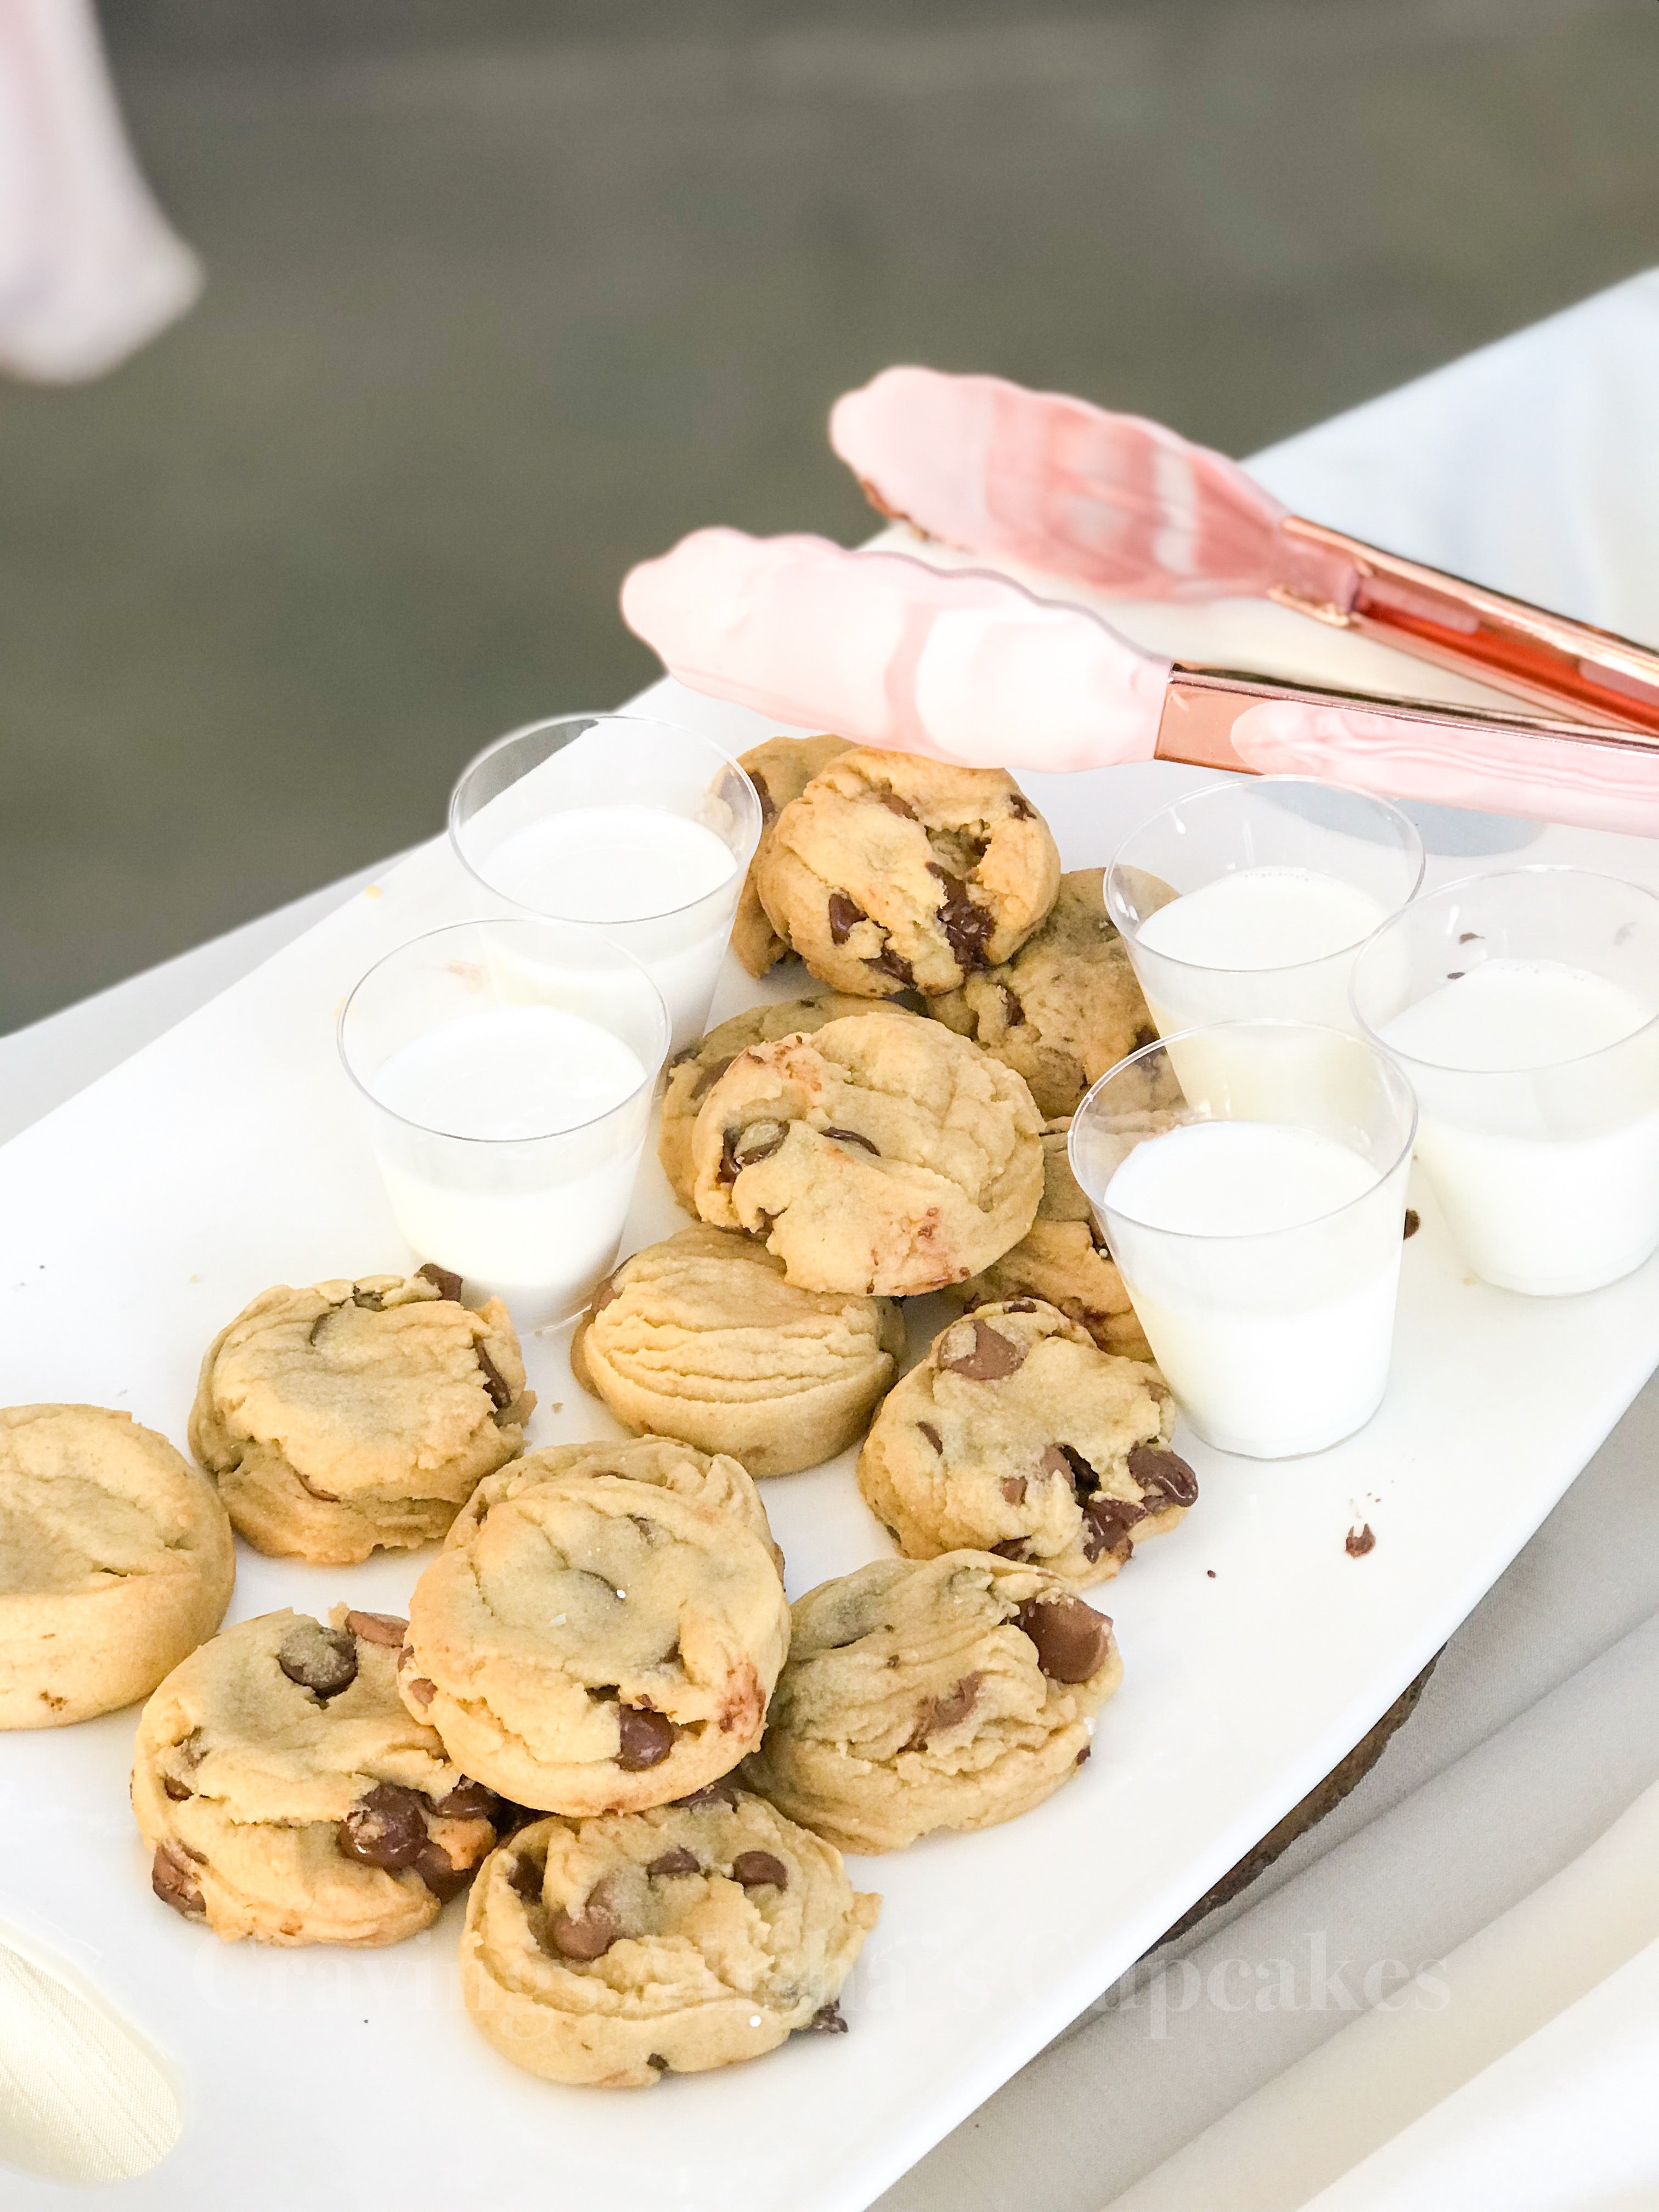 ⭐️All inclusive Catering Mini Chocolate Chip Cookies + milk shots